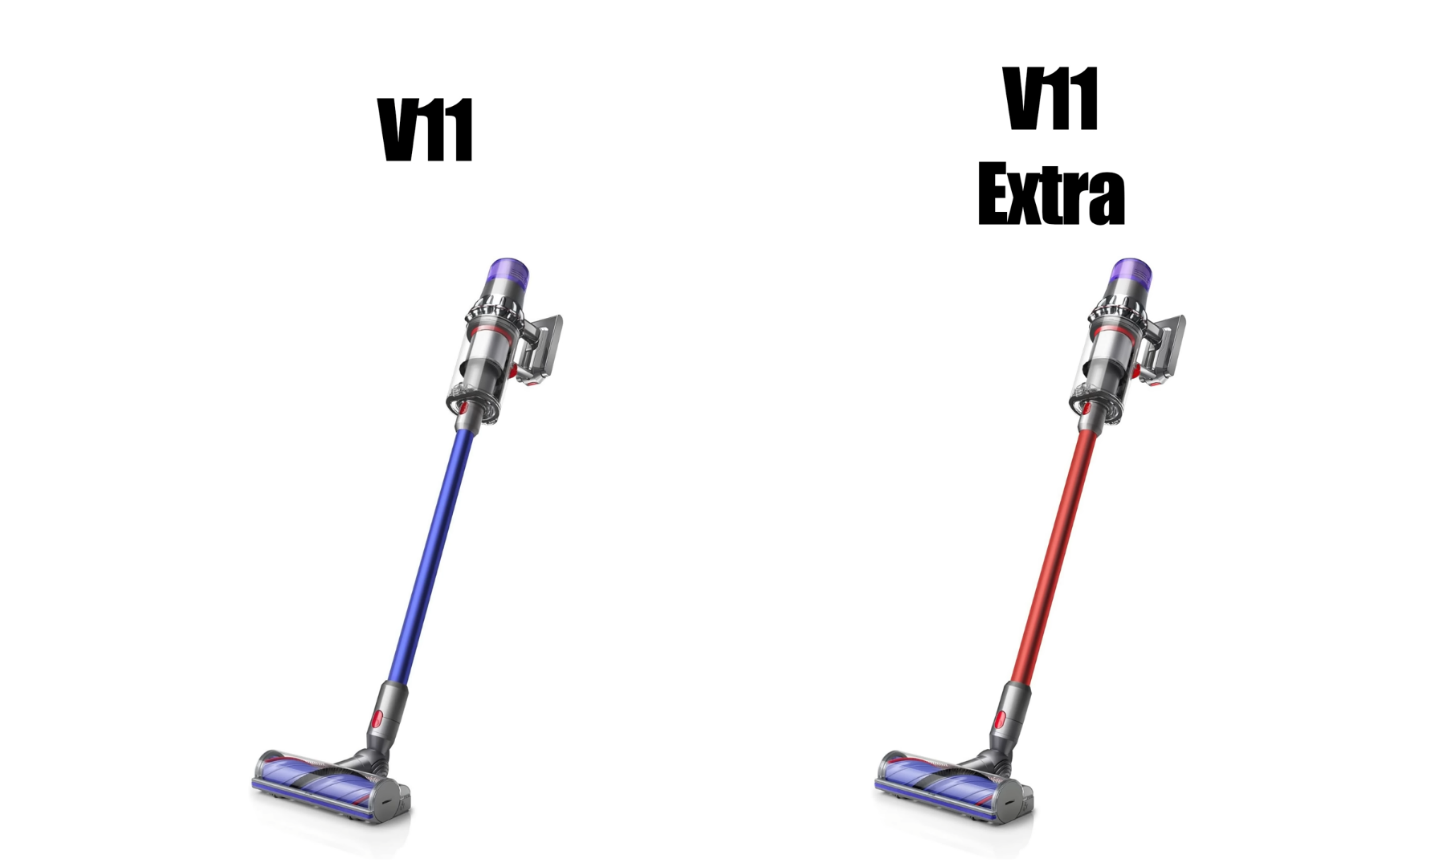 Two Dyson V11 cordless vacuums (V11 and V11 Extra) displayed against a white background.